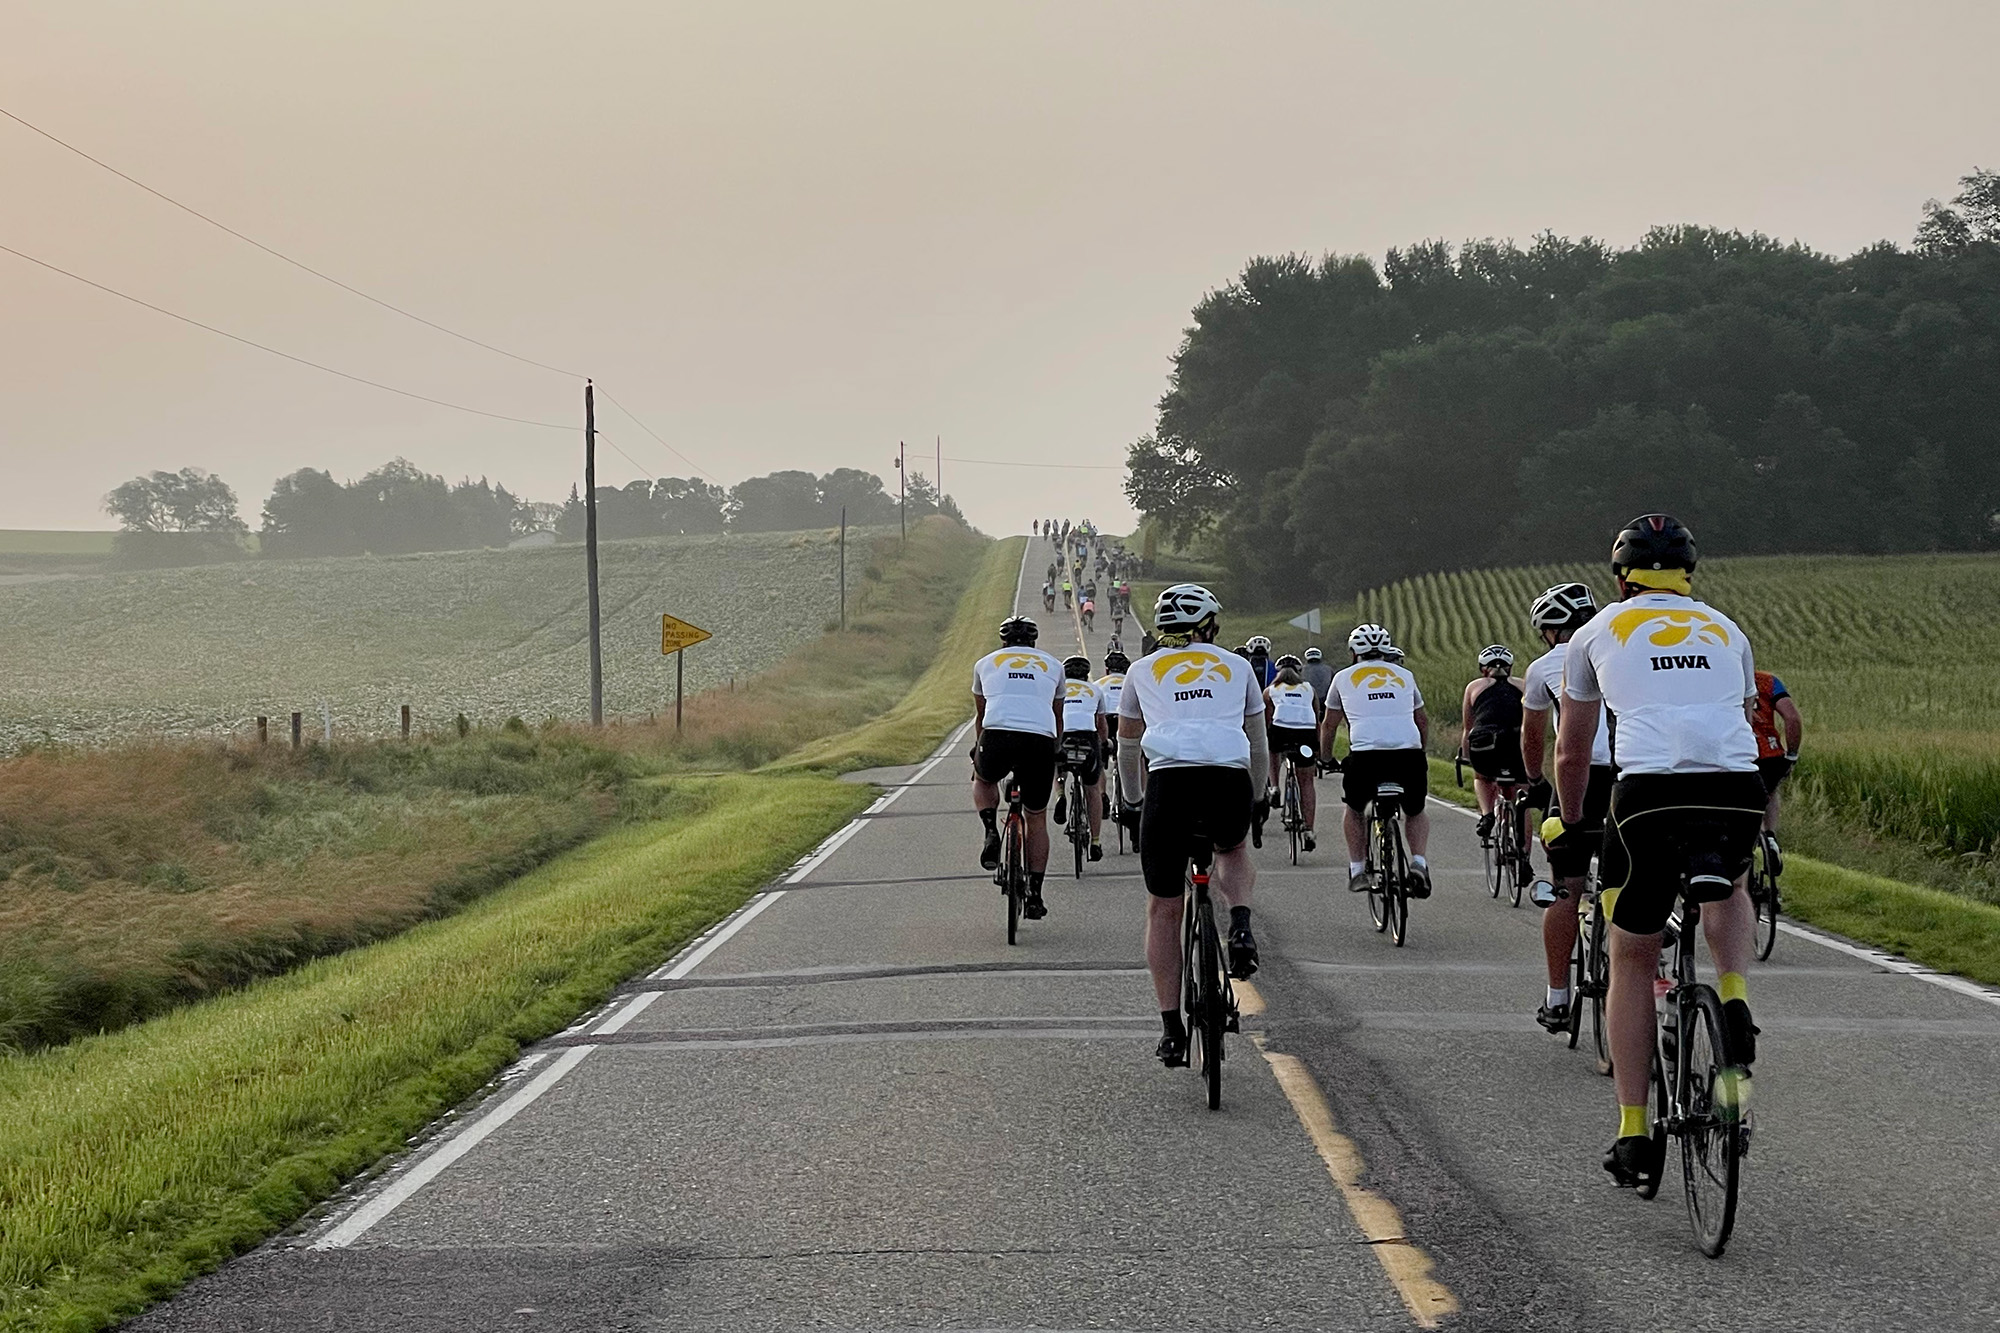 riders wearing gear adorned with Tiger hawk logos travel down a scenic country road during RAGBRAI